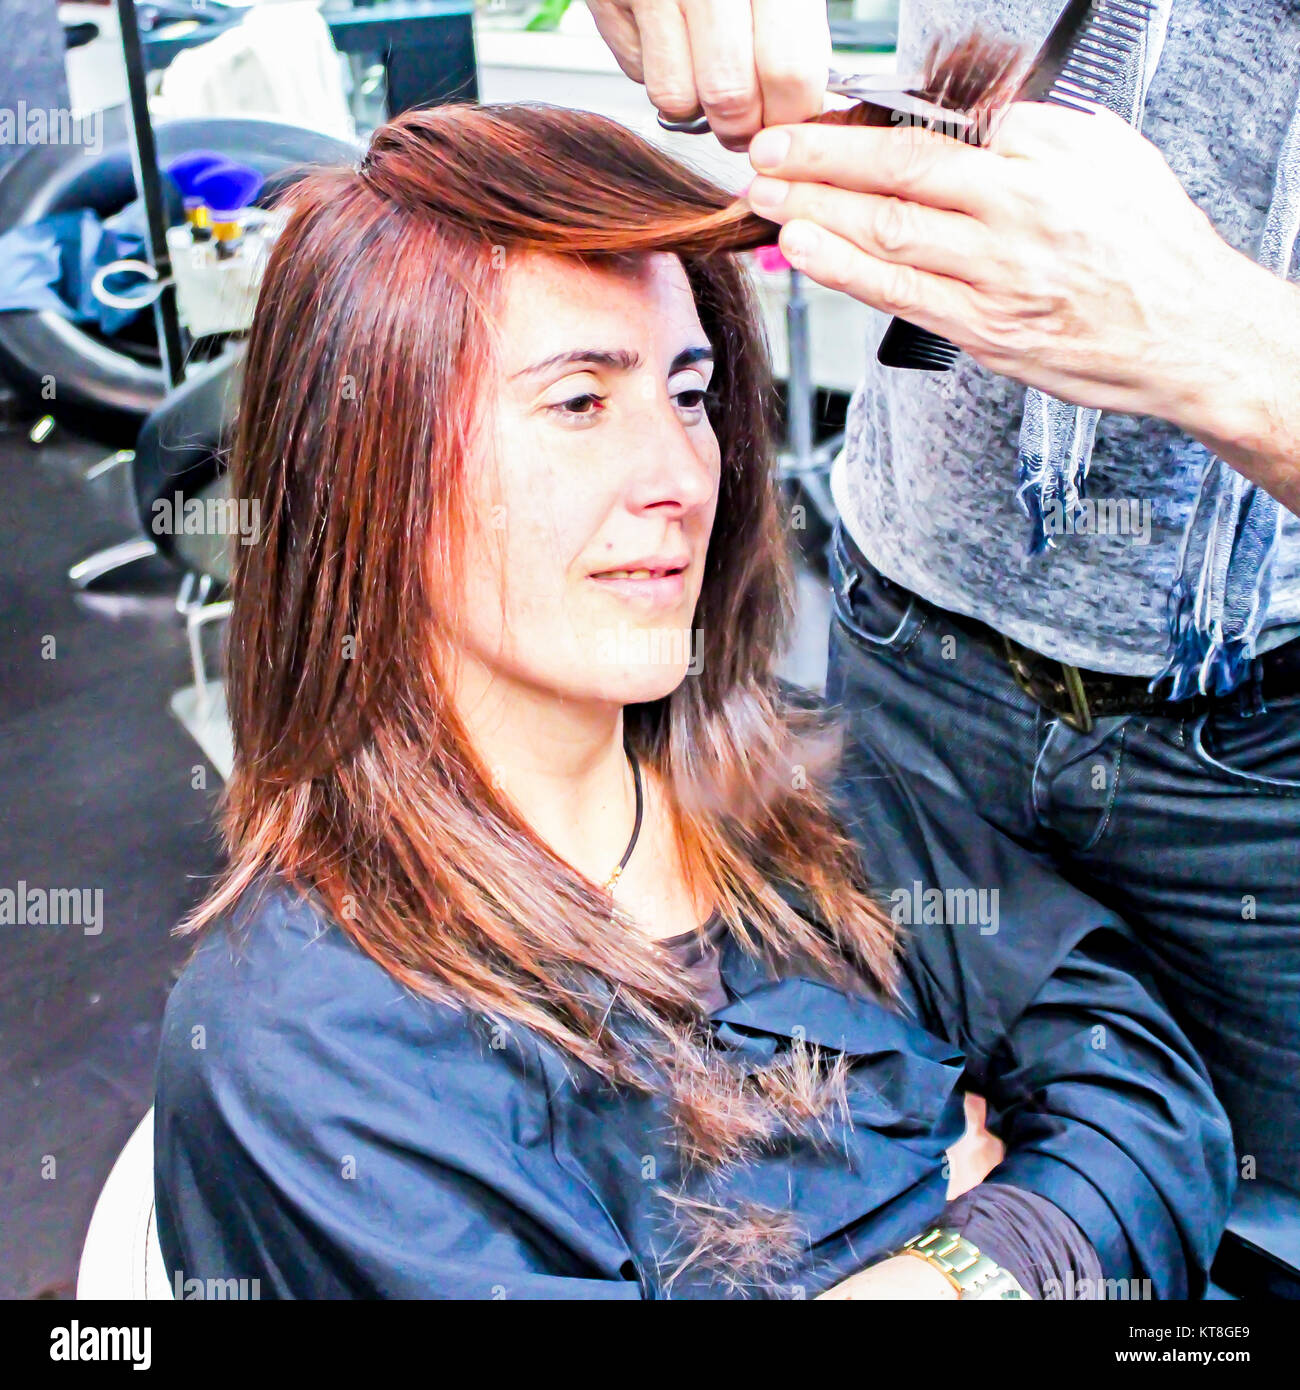 Woman Having Her Long Red Hair Cut By A Stylist Man With